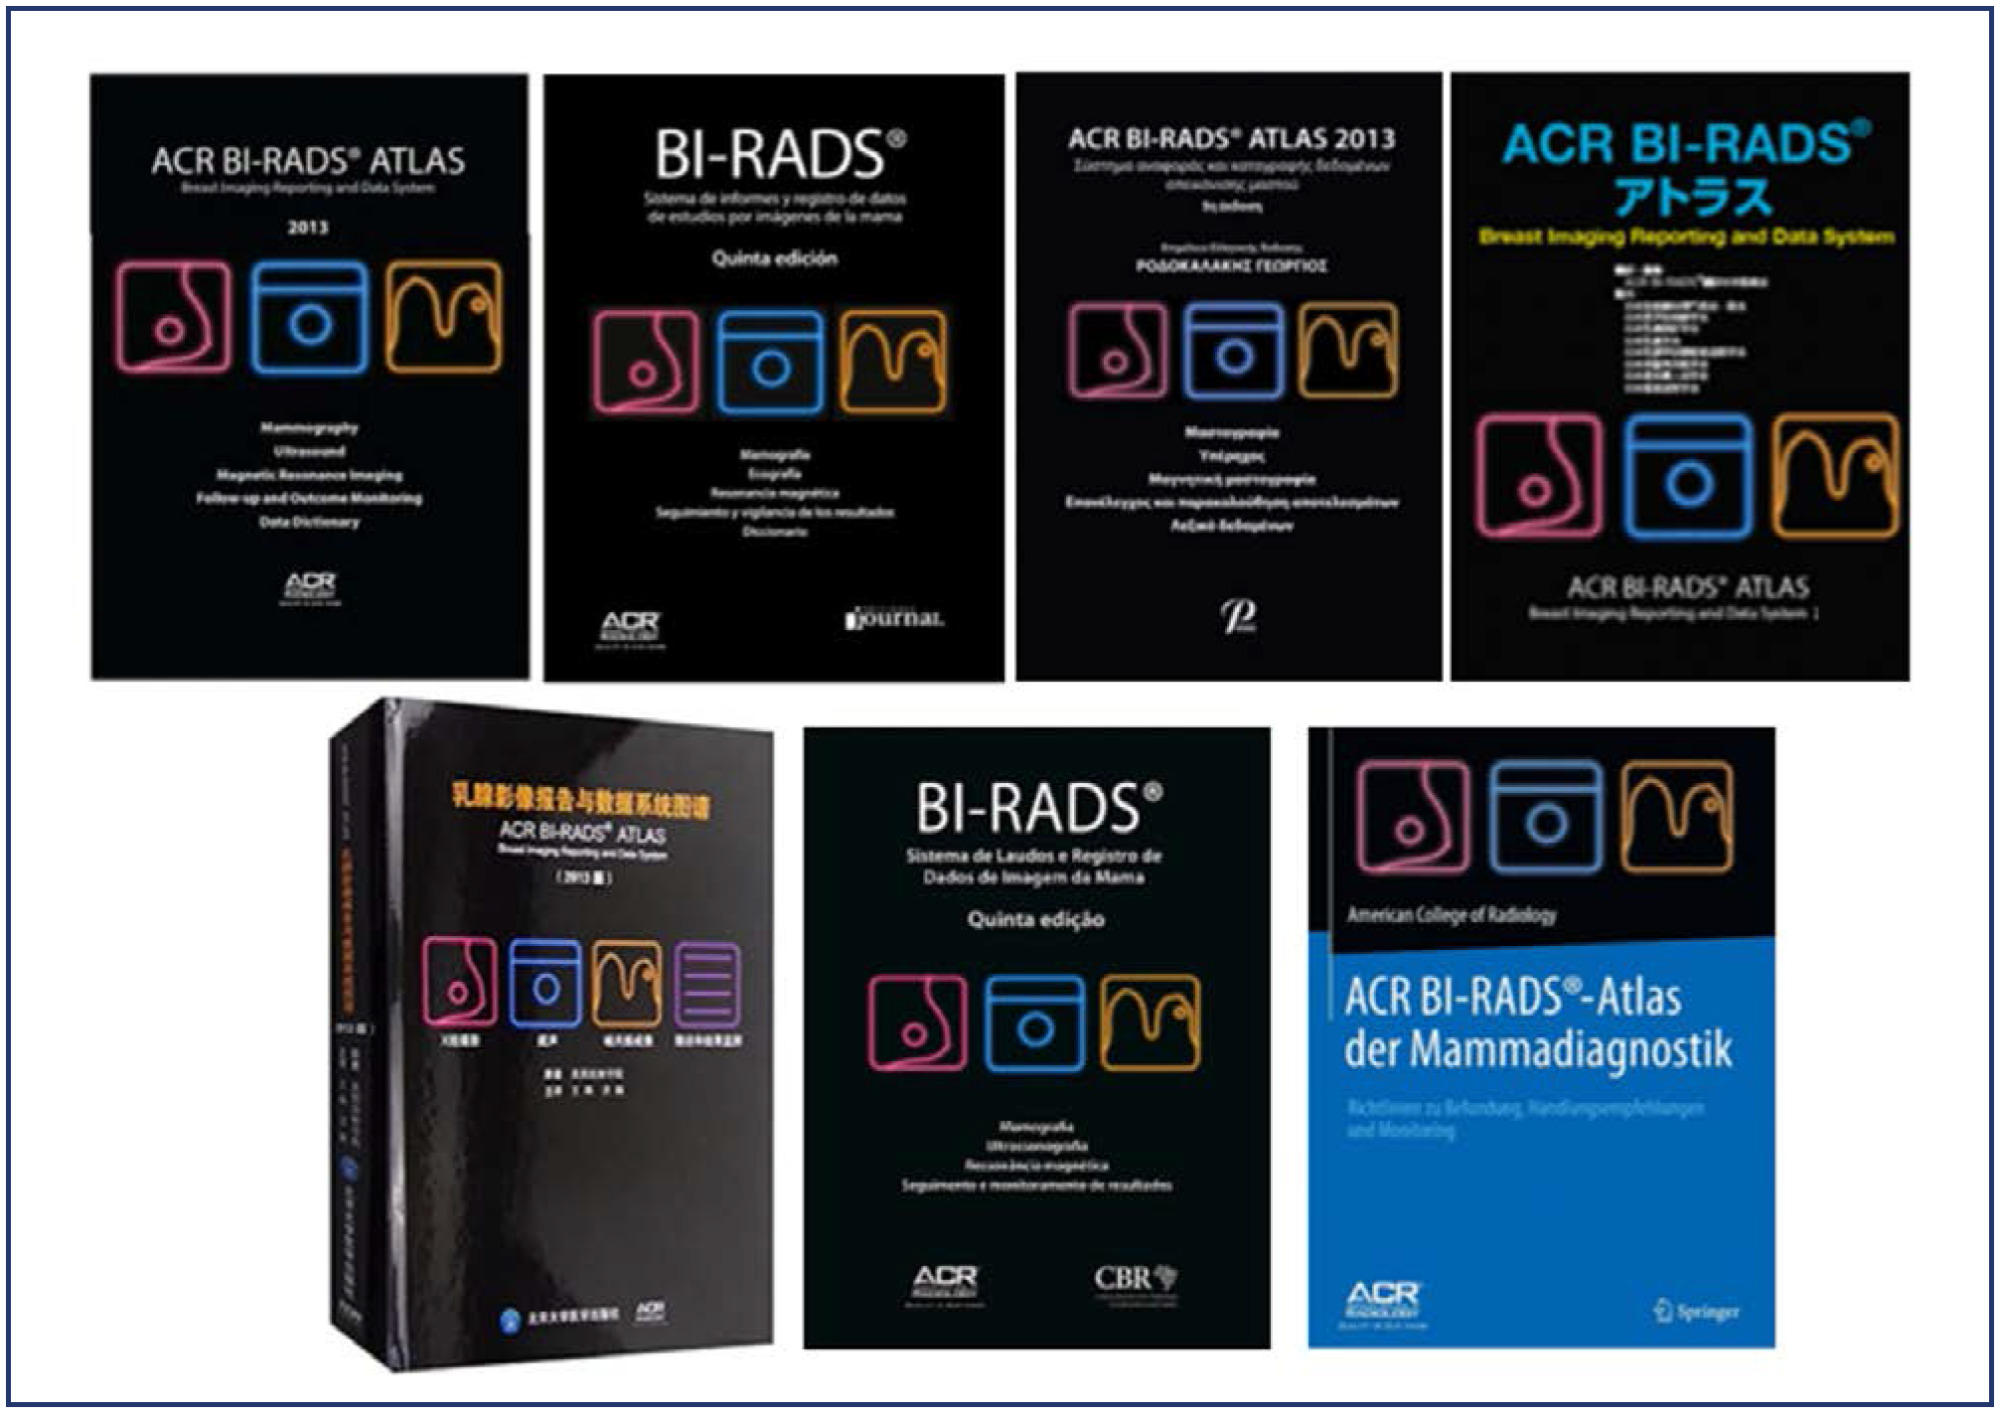 Breast Imaging Reporting and Data System (BI-RADS®): a success history and particularities of its use in Brazil